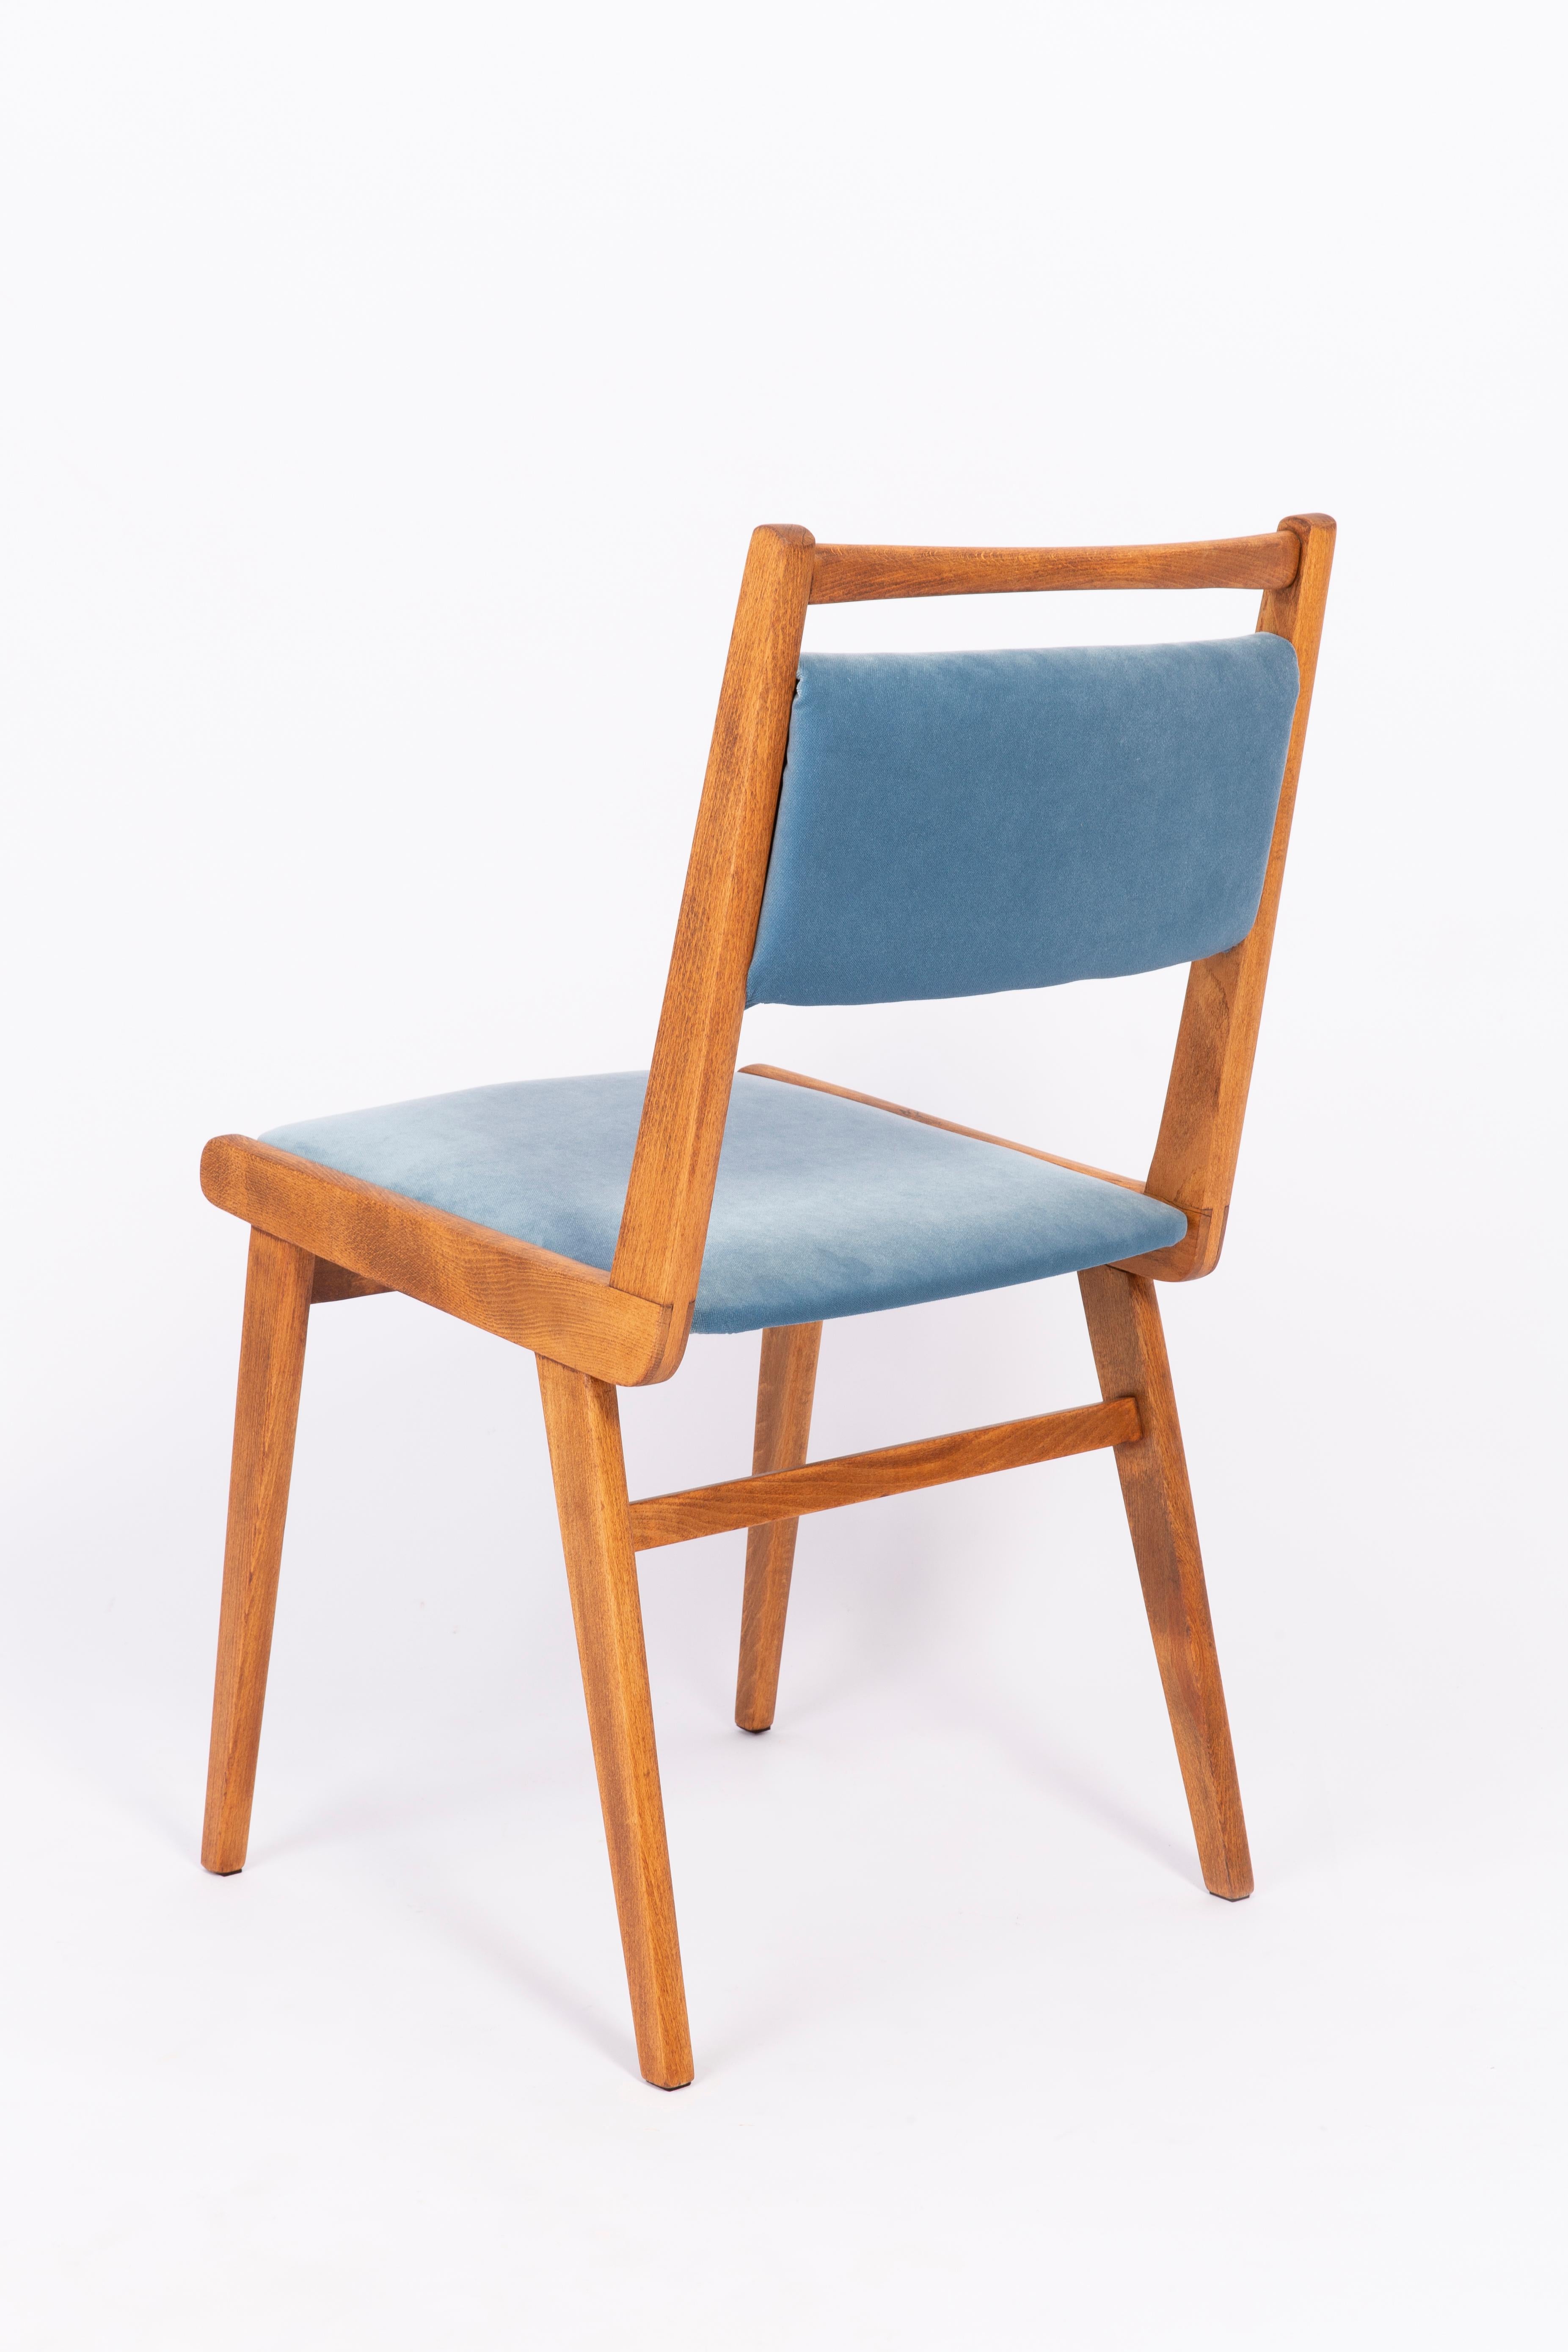 Hand-Crafted 20th Century Baby Blue Velvet Chair, Poland, 1960s For Sale